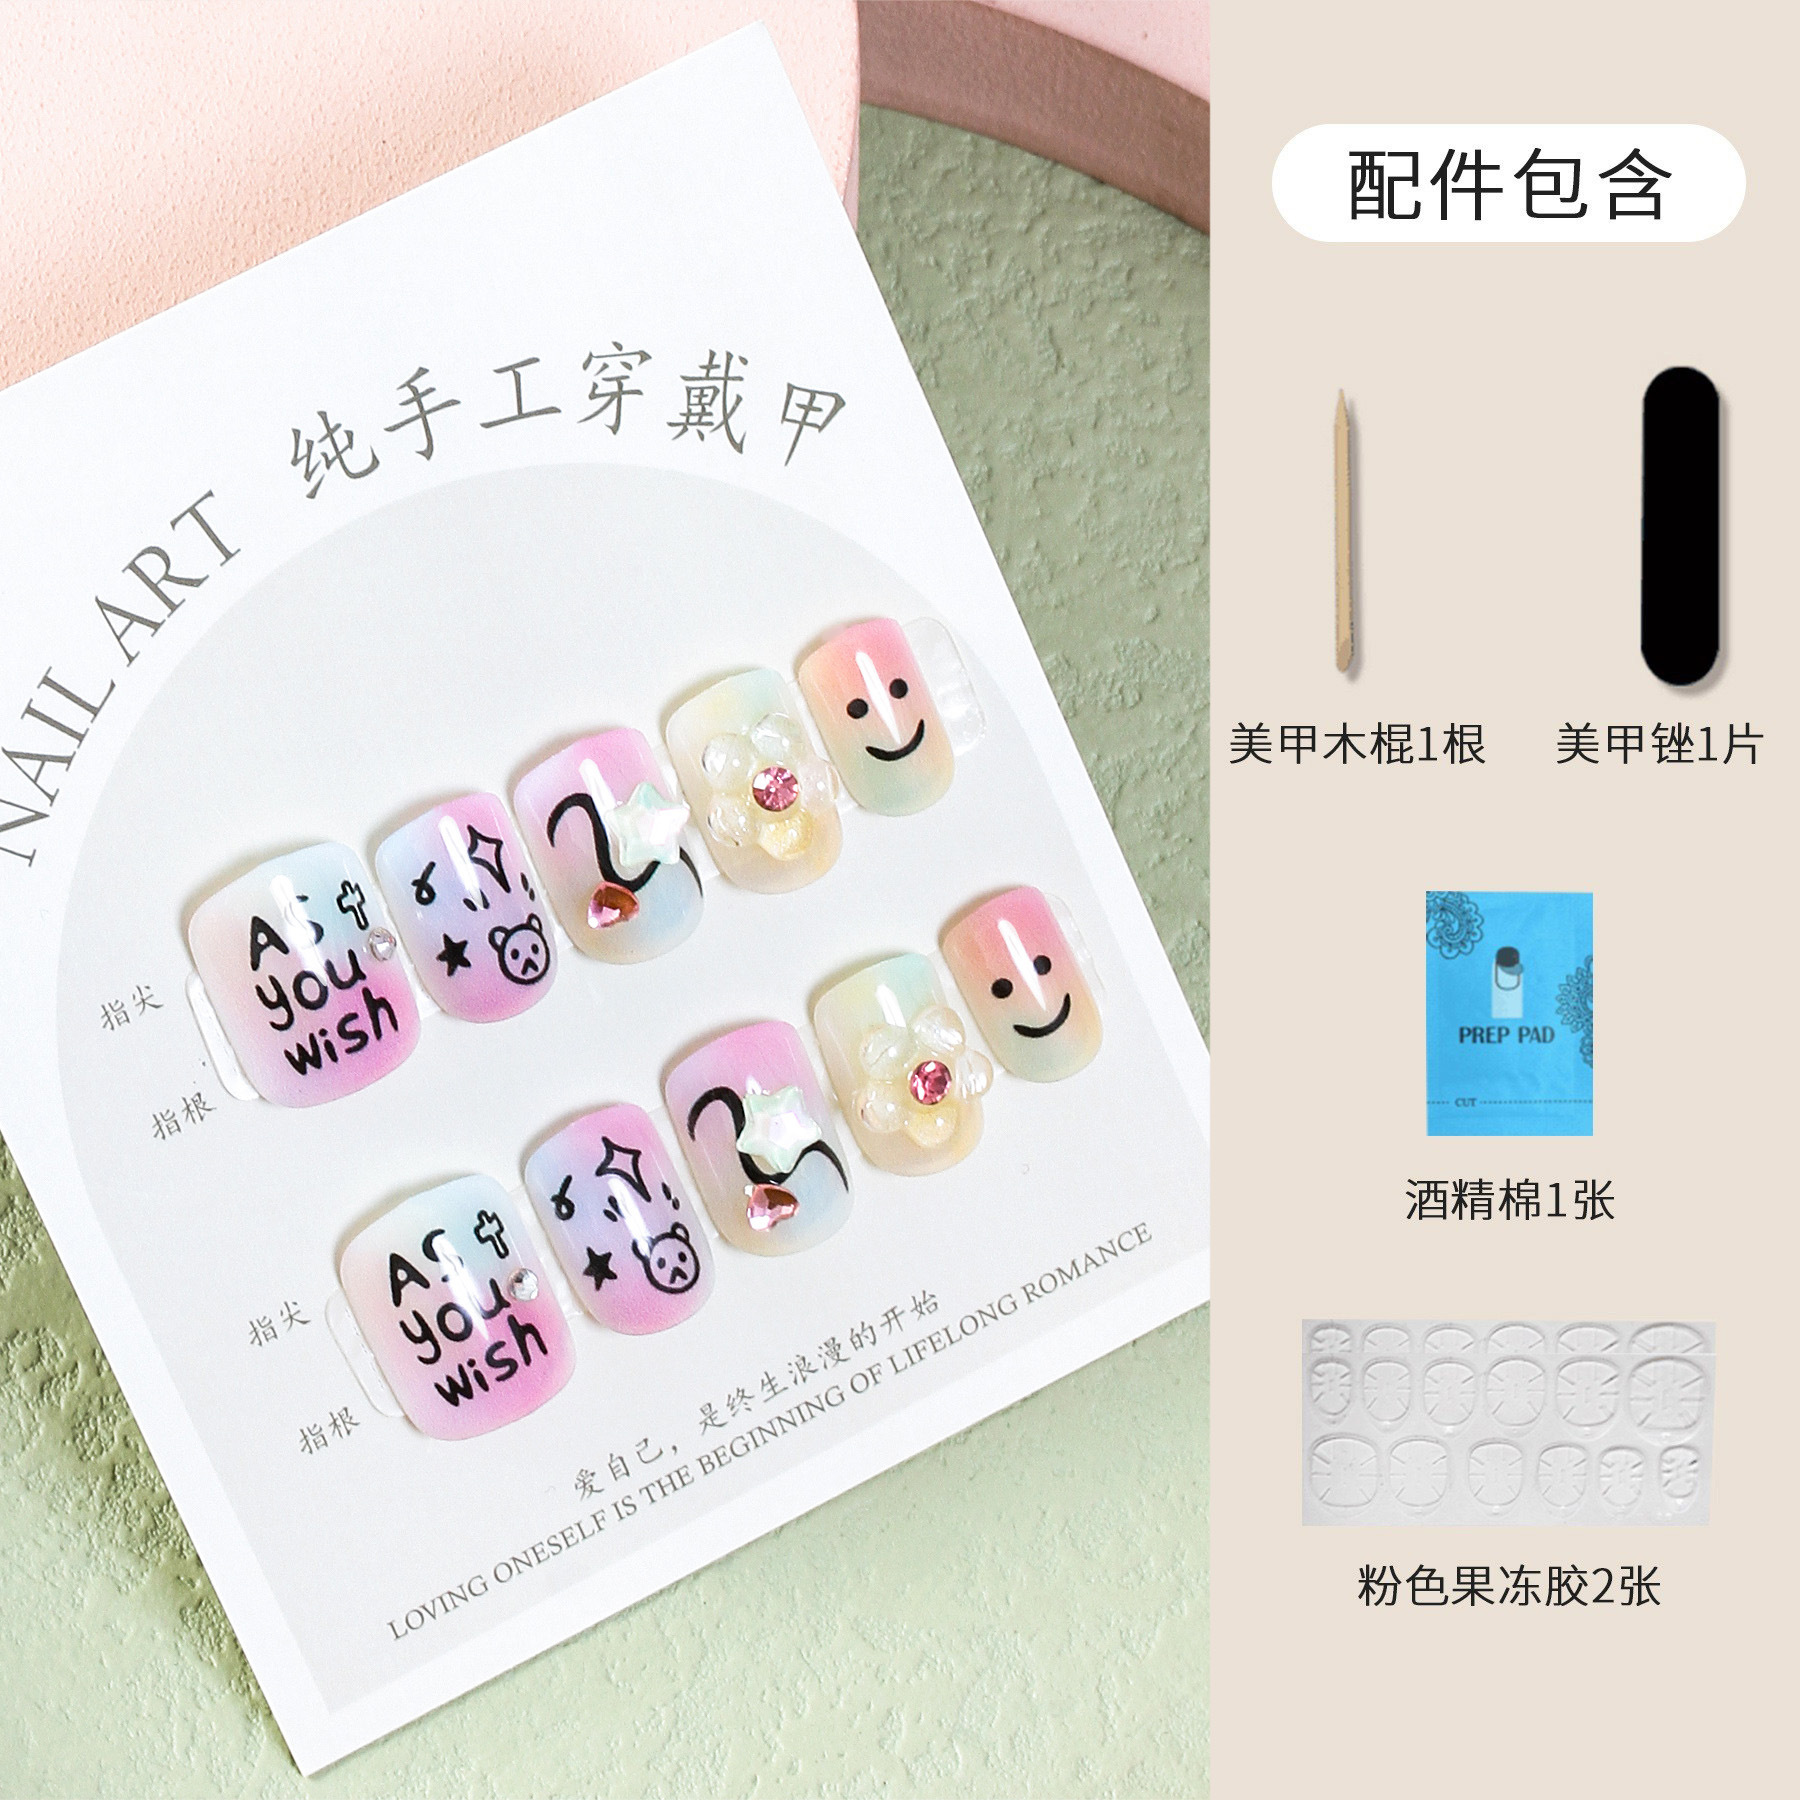 New Best-Seller on Douyin Hand-Worn Armor English Smudges Small and Short Armor Removable Fake Nail Patch Sub-Size